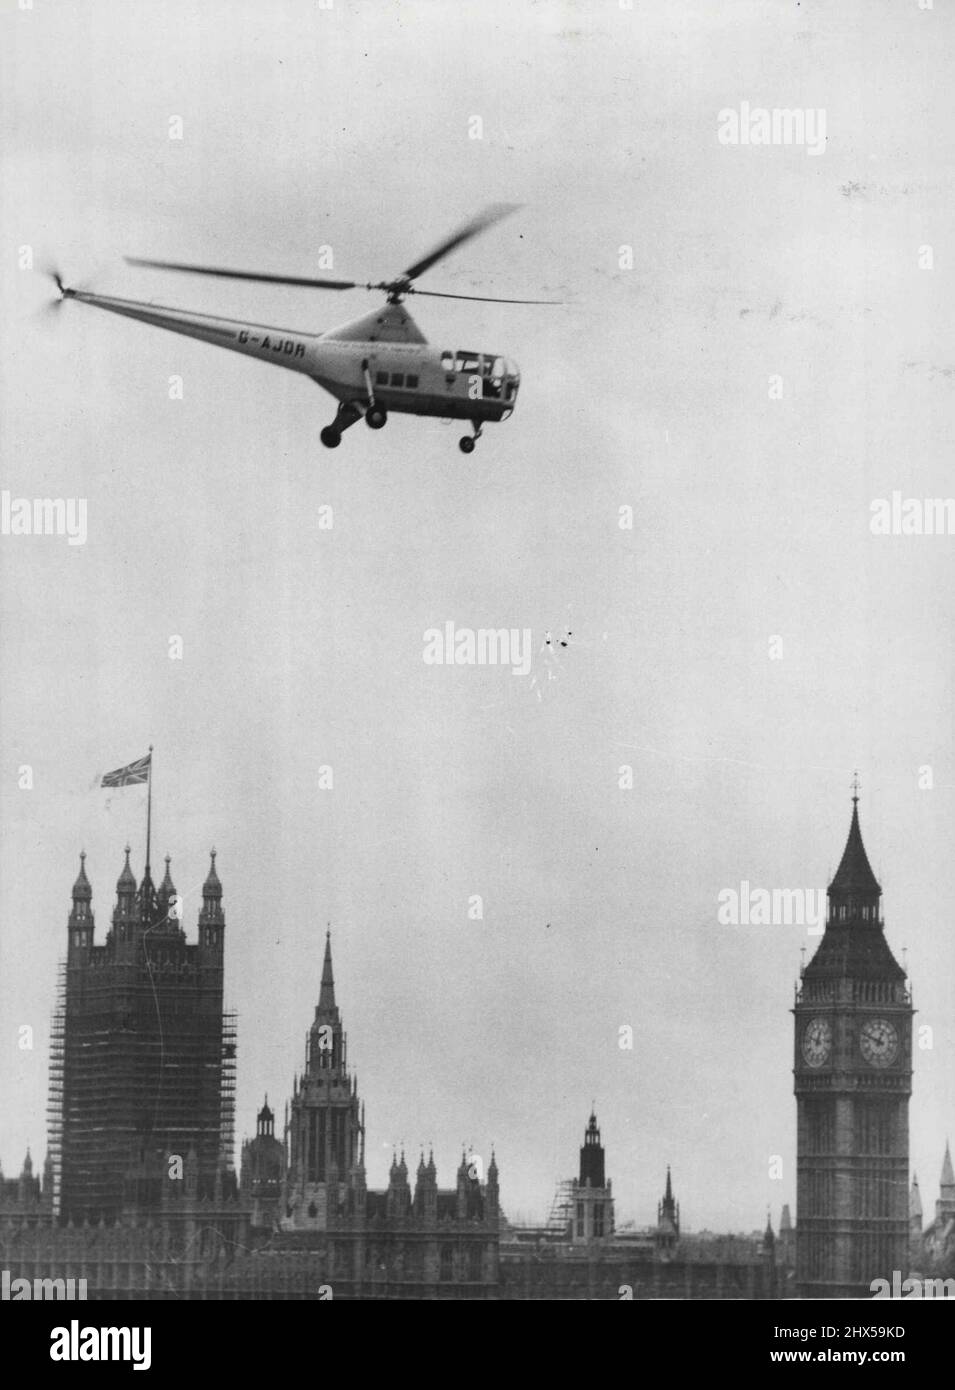 Helicopters Test Festival Site As An Airstop -- A View of the helicopter flying from the Festival site over the river, with the House of Parliament in the background.  The Practicability of the former Festival south Bank site, was an airstop, was tried out today by Bristol 171 and Sikorsky S51 helicopters. The aircraft landed on the Fairway between the sites of the Dome of Discovery and the Transport Pavilion and the object was to test landing techniques on a site in a built-up area and to measure the noise ***** in the Vicinity. July 28, 1952. (Photo by Fox Photos). Stock Photo